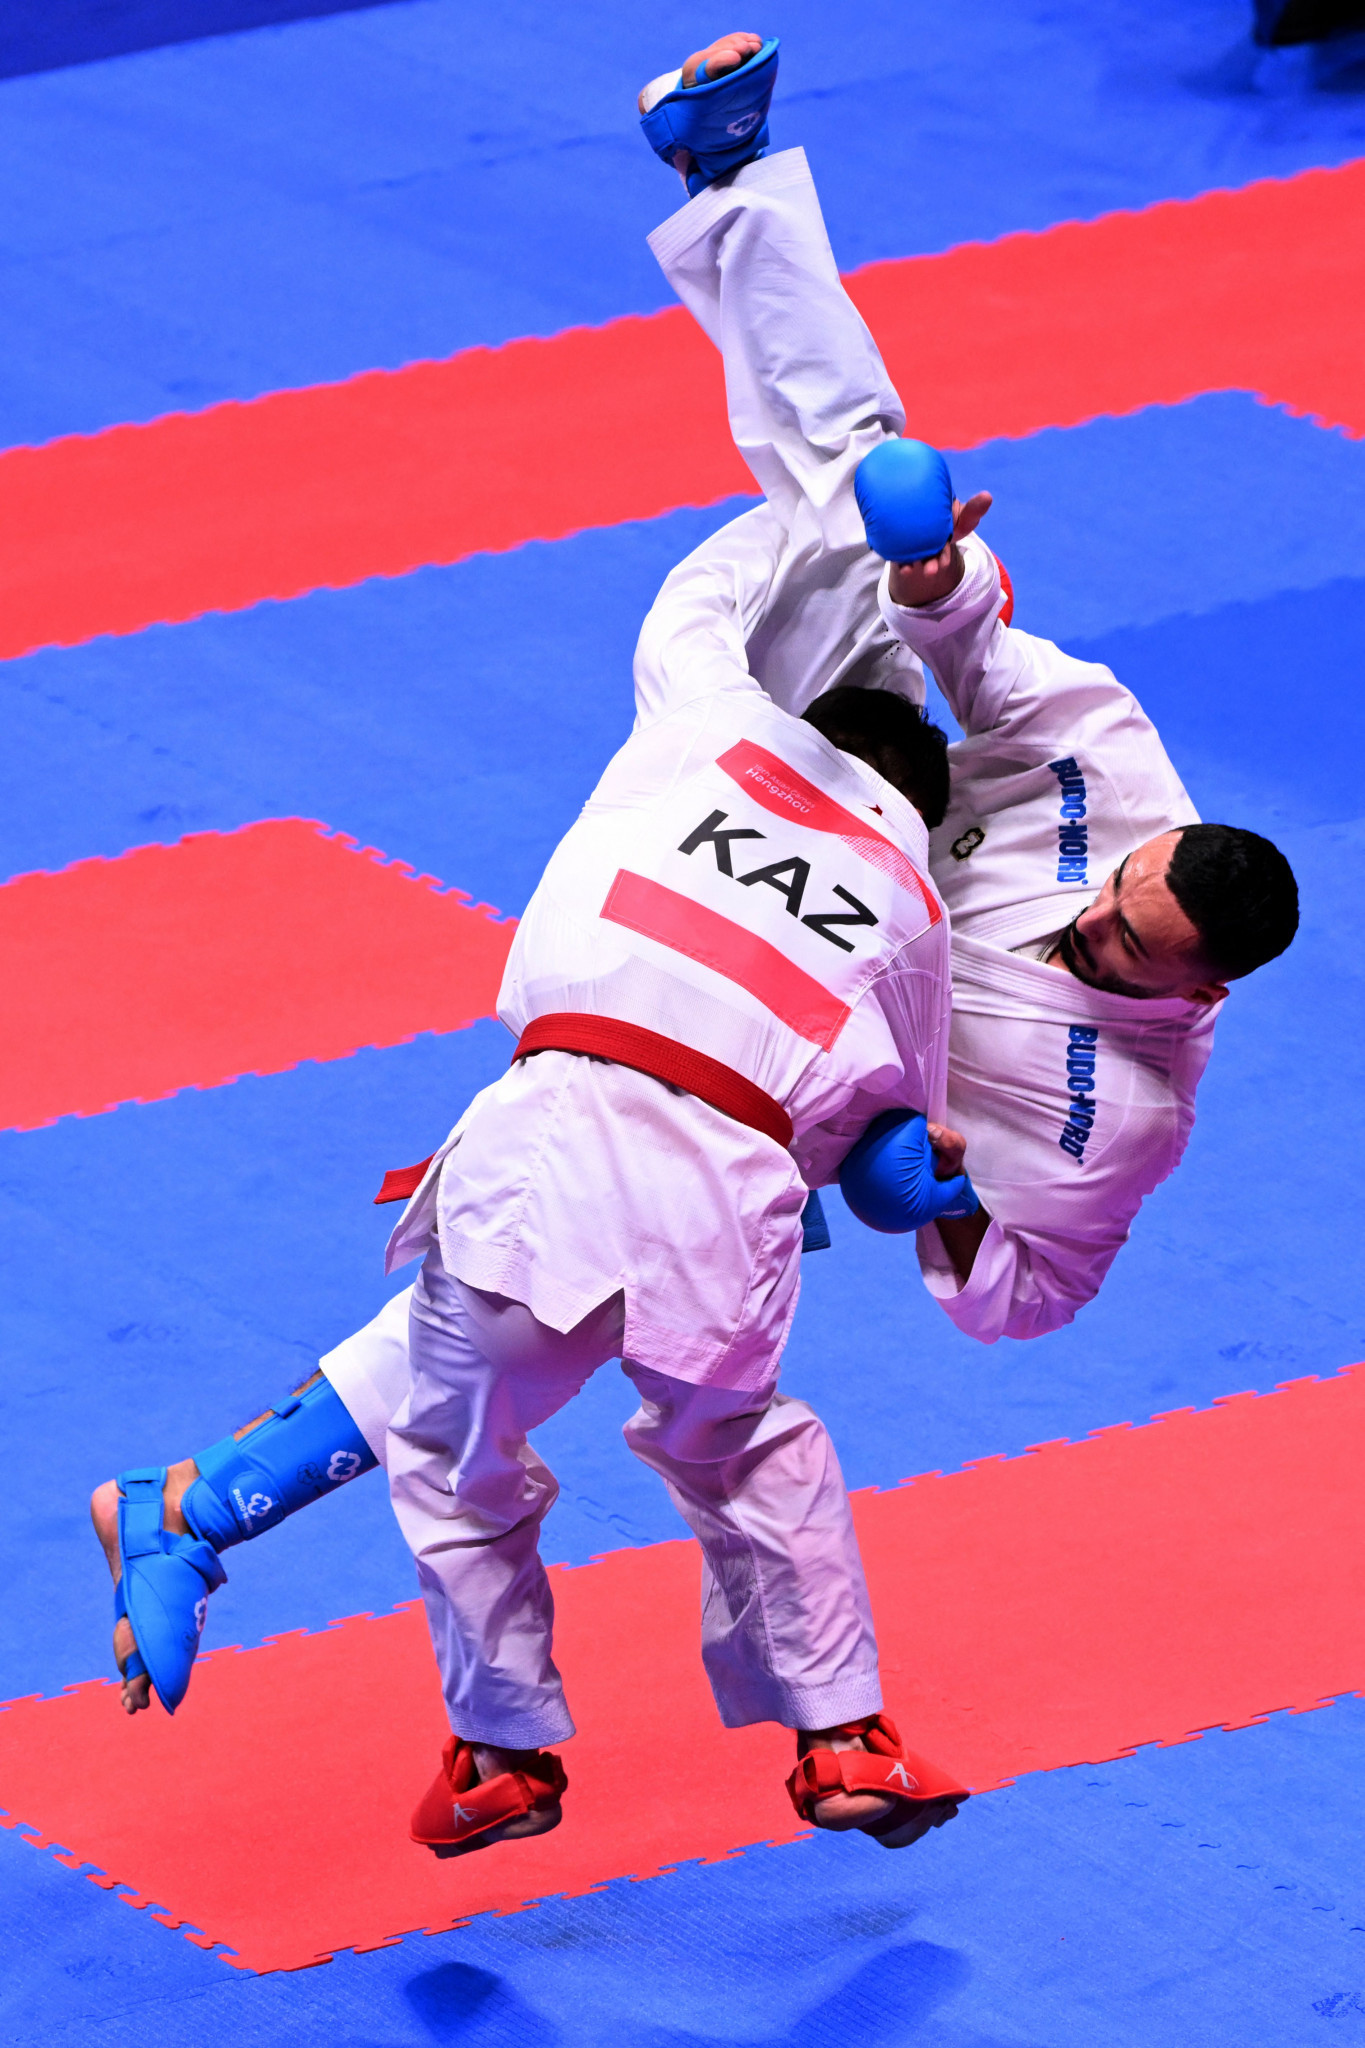 Kazakhstan finished top of the karate medals table at Hangzhou 2022 with eight medals, including three gold, of which Nurkanat Azhikanov won one in the men's kumite under-75kg ©Getty Images